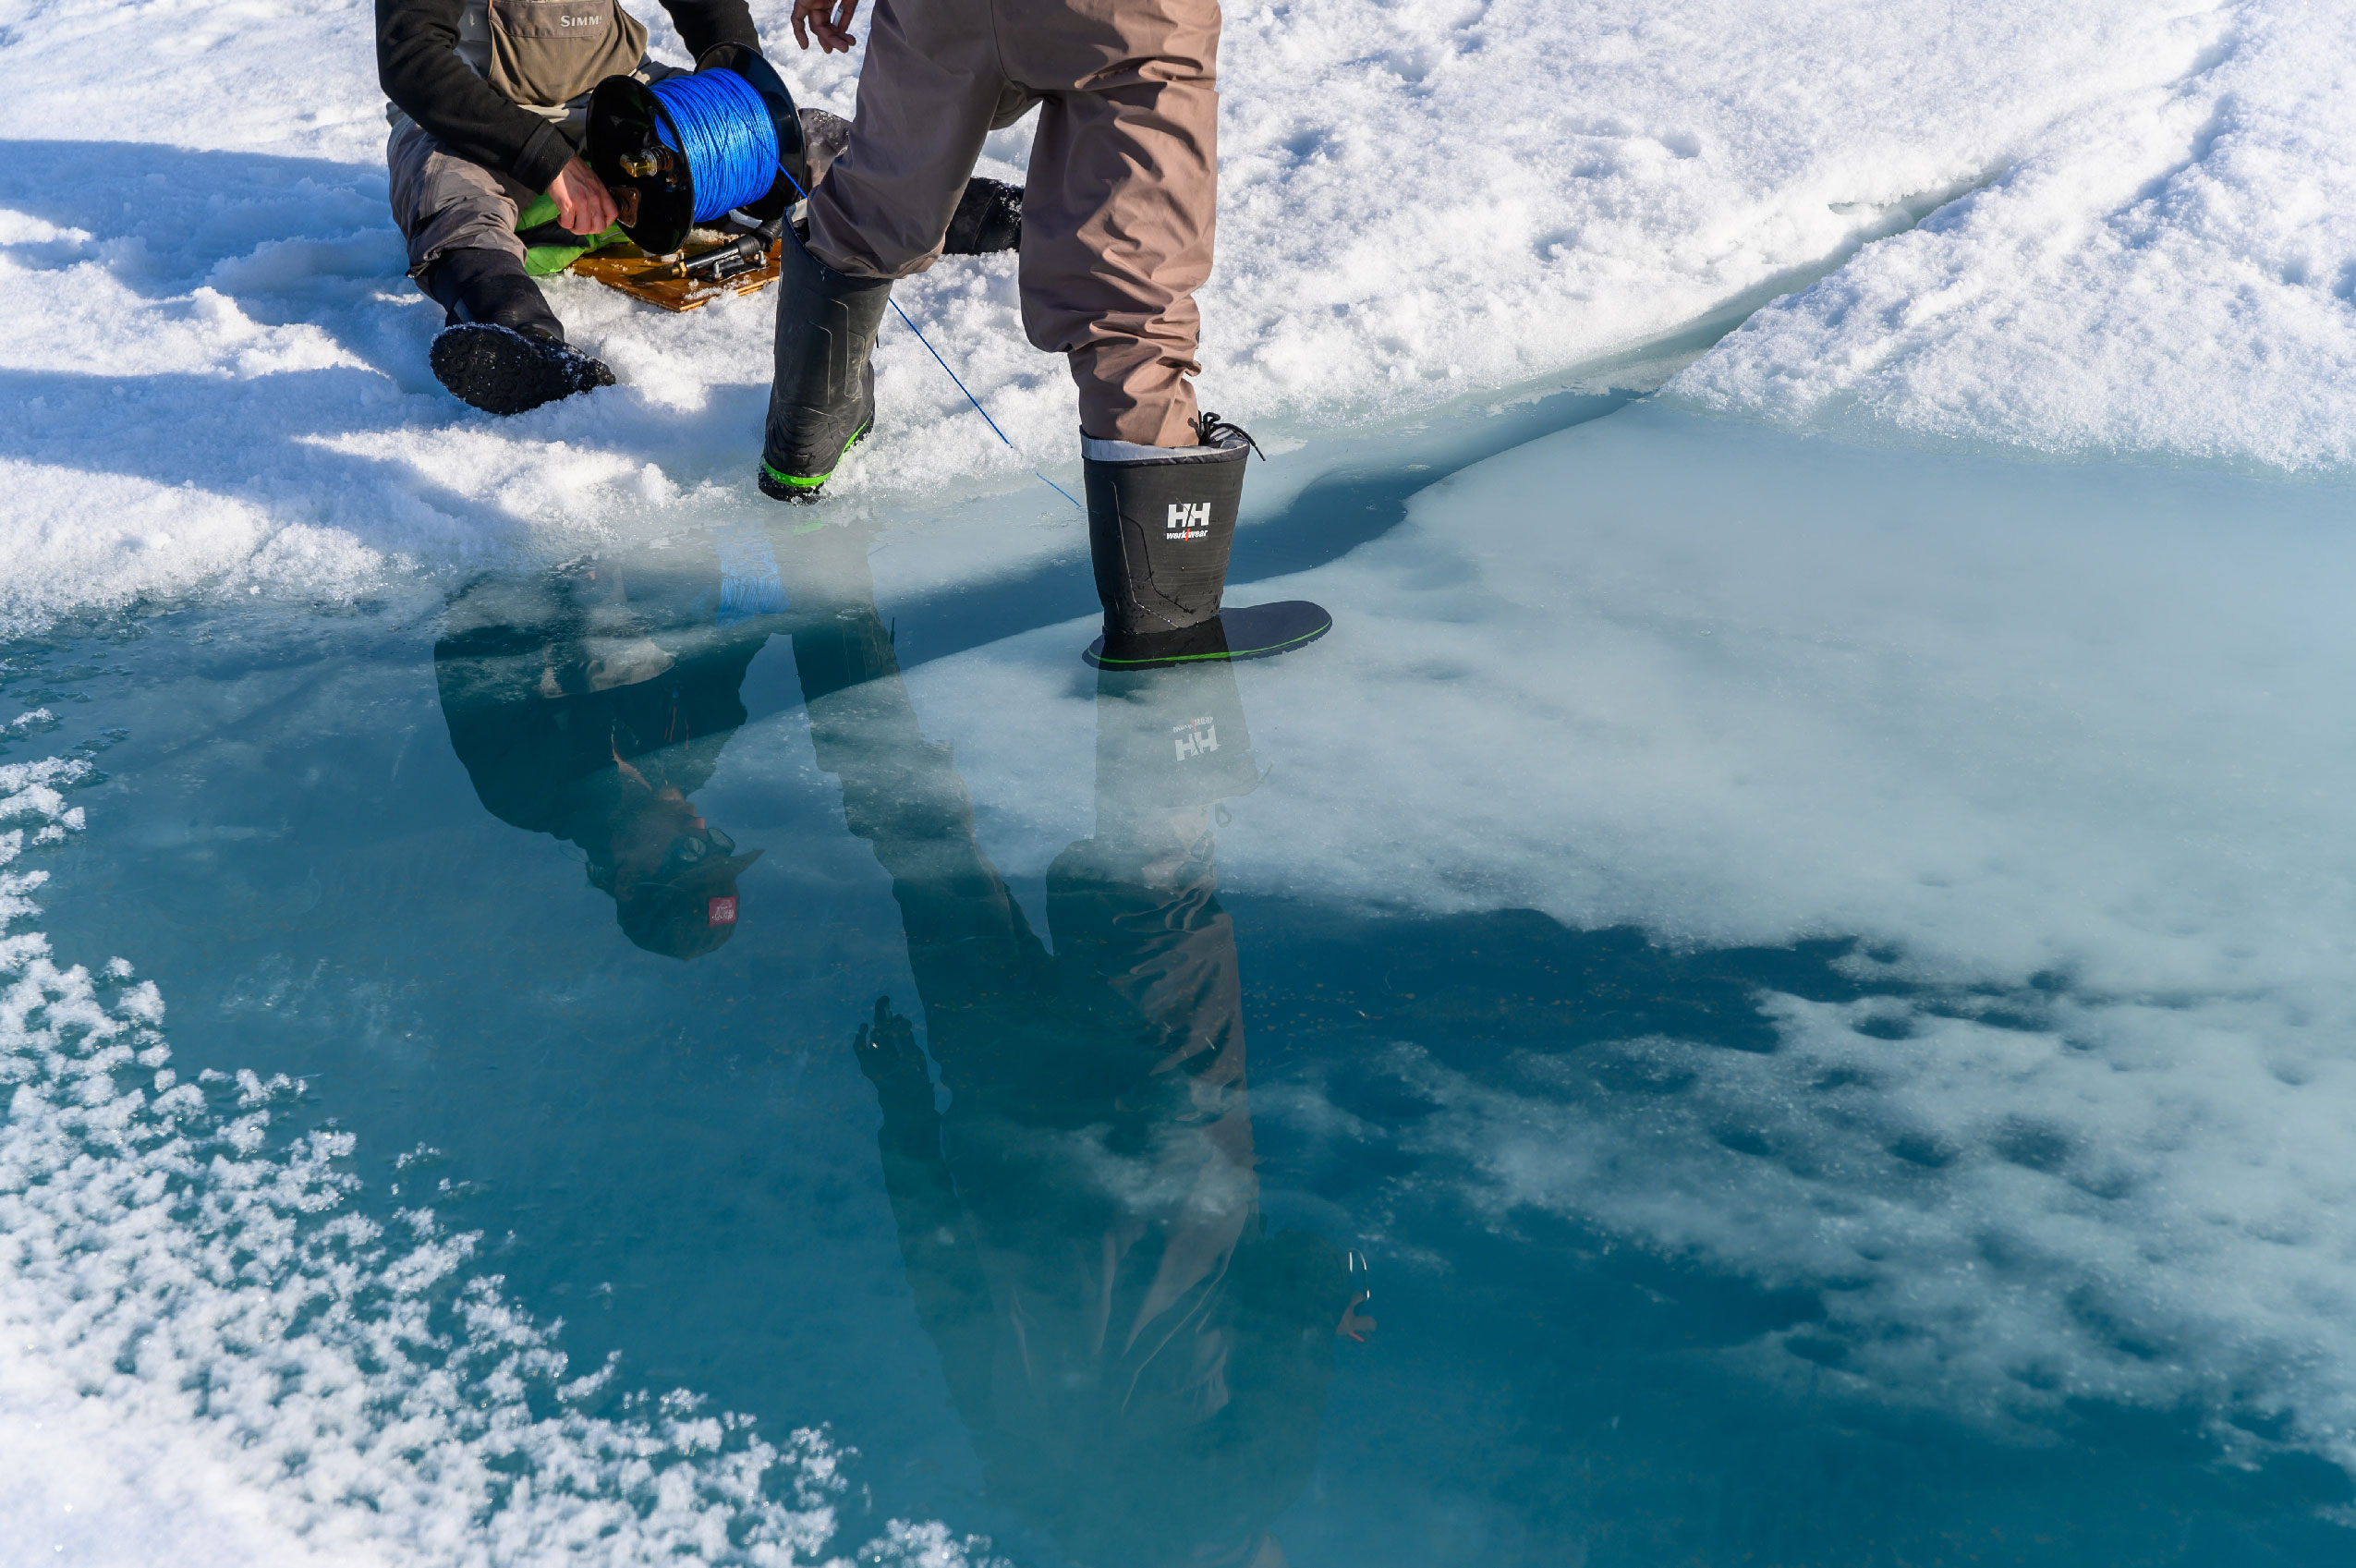 Two scientists on the ice with a long cable on a spindle. One scientist has a foot submerged in water halfway up their boot.